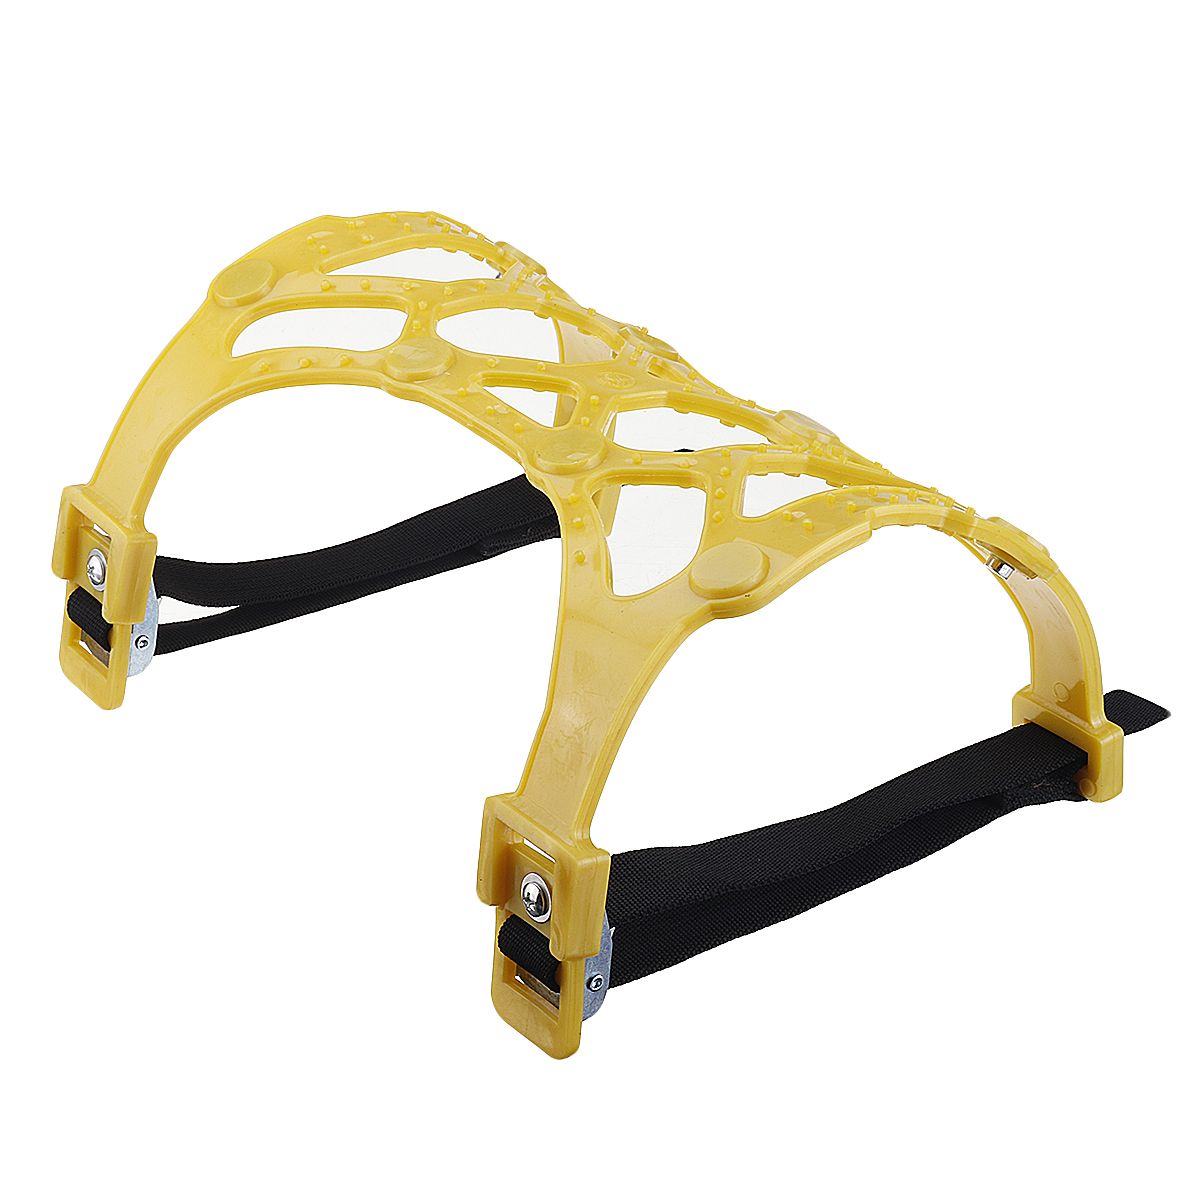 Yellow-TPU-Winter-Car-Snow-Chain-SUV-Truck-Wheel-Tyre-Anti-skid-Safety-Belt-Safe-Driving-For-Ice-San-1602712